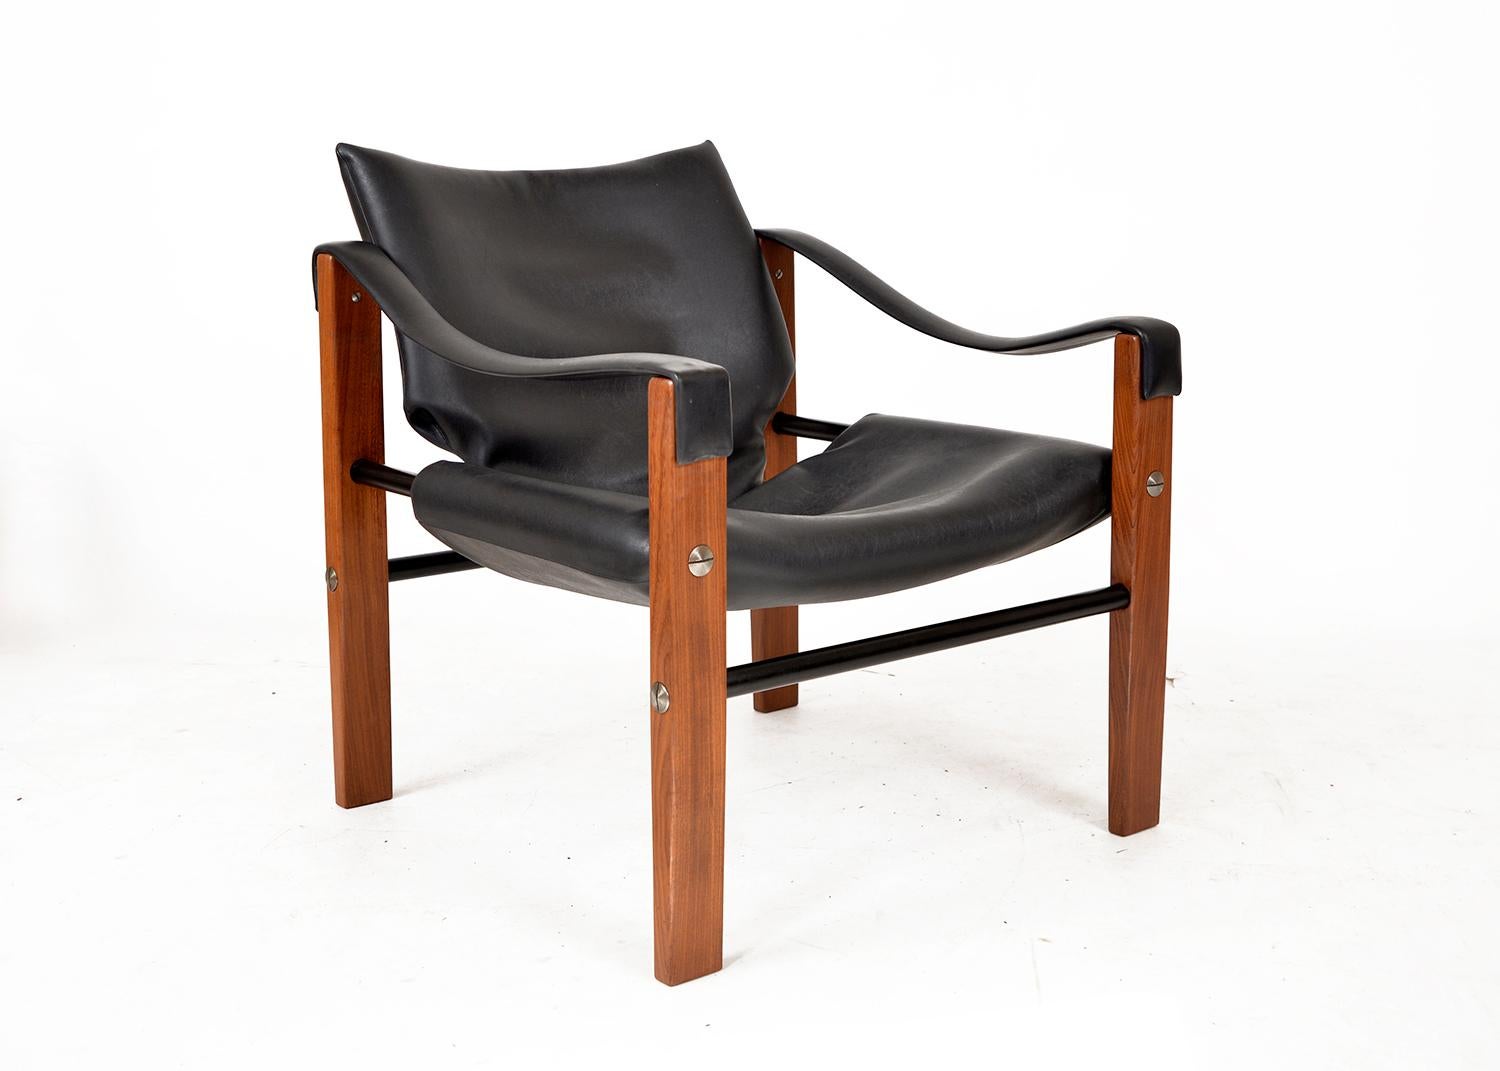 Stunning Safari lounge chair, “Chelsea” model, designed by Maurice Burke in the 1960s for Arkana. The heavy black faux leather is soft and in great condition, accented with over-sized stainless steel rivets on a solid African teak frame and steel